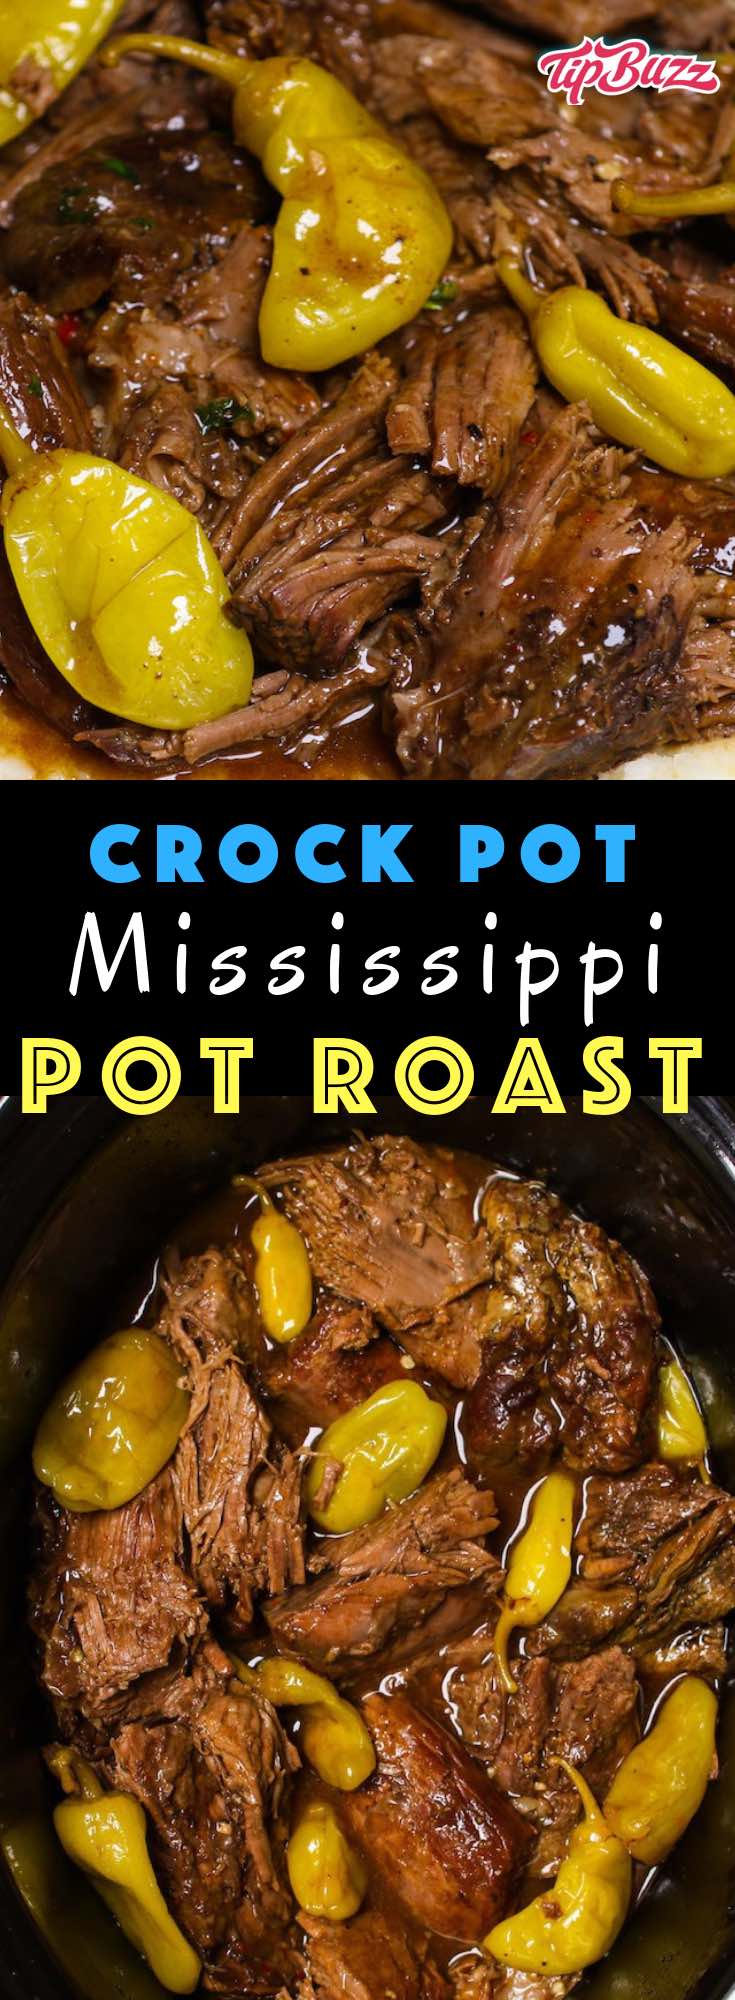 This Mississippi Pot Roast is one of the most delicious crock pot dinners you'll ever make! It's some of the most flavorful comfort food that’s super juicy and fork-tender. You only need 5 minutes of preparation to make this epic meal in the slow cooker! 